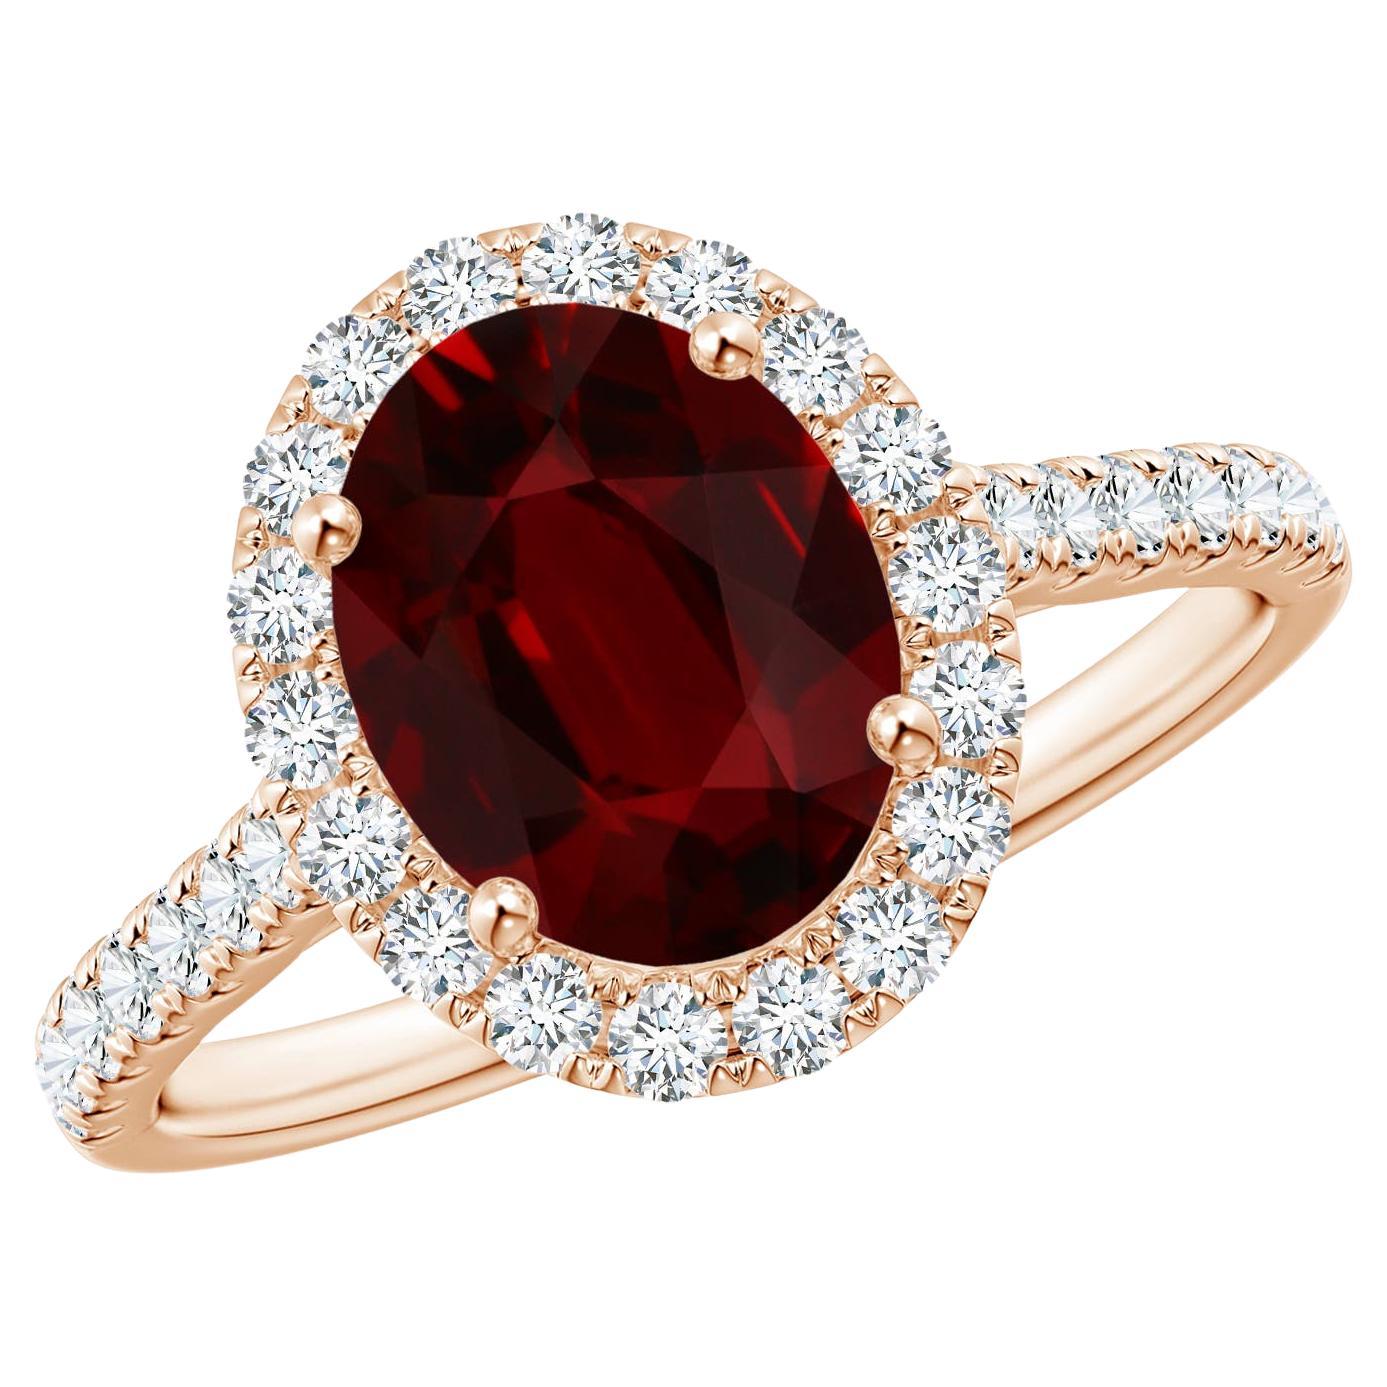 For Sale:  Angara Gia Certified Natural Ruby Halo Ring in Rose Gold with Diamonds